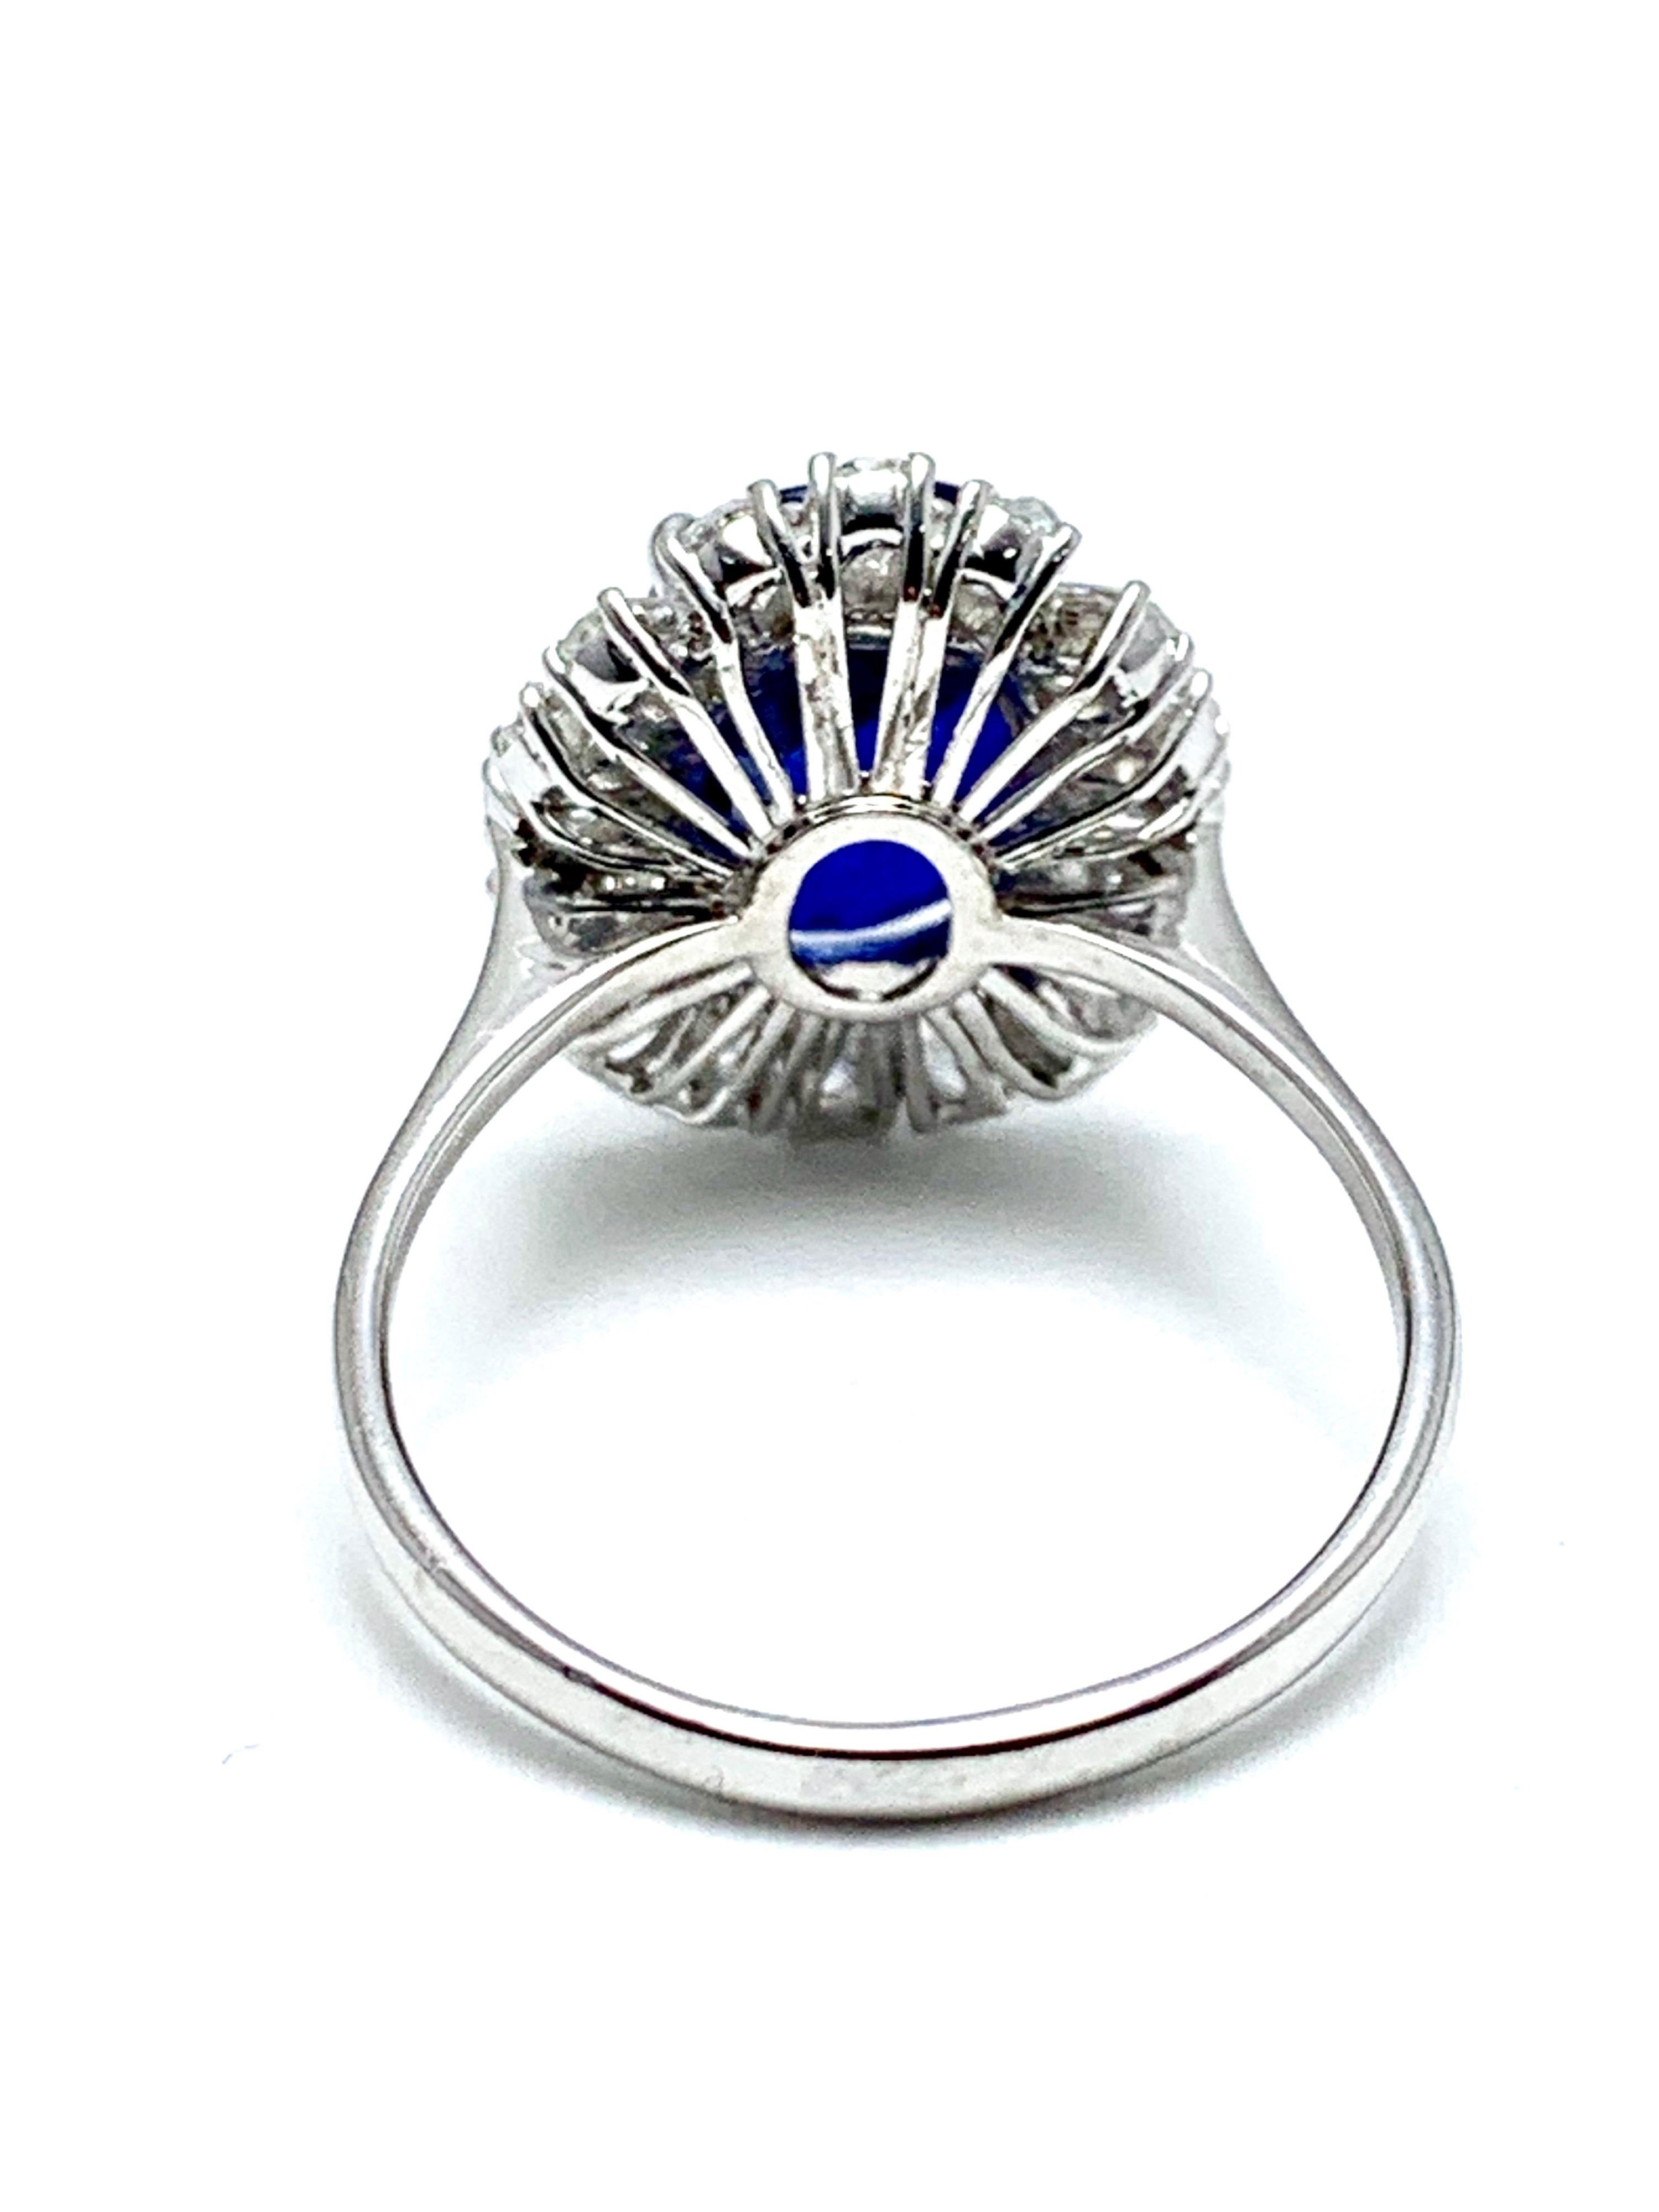 4.60 Carat Cushion Cut Sapphire and Oval Diamond Halo White Gold Cocktail Ring For Sale 1